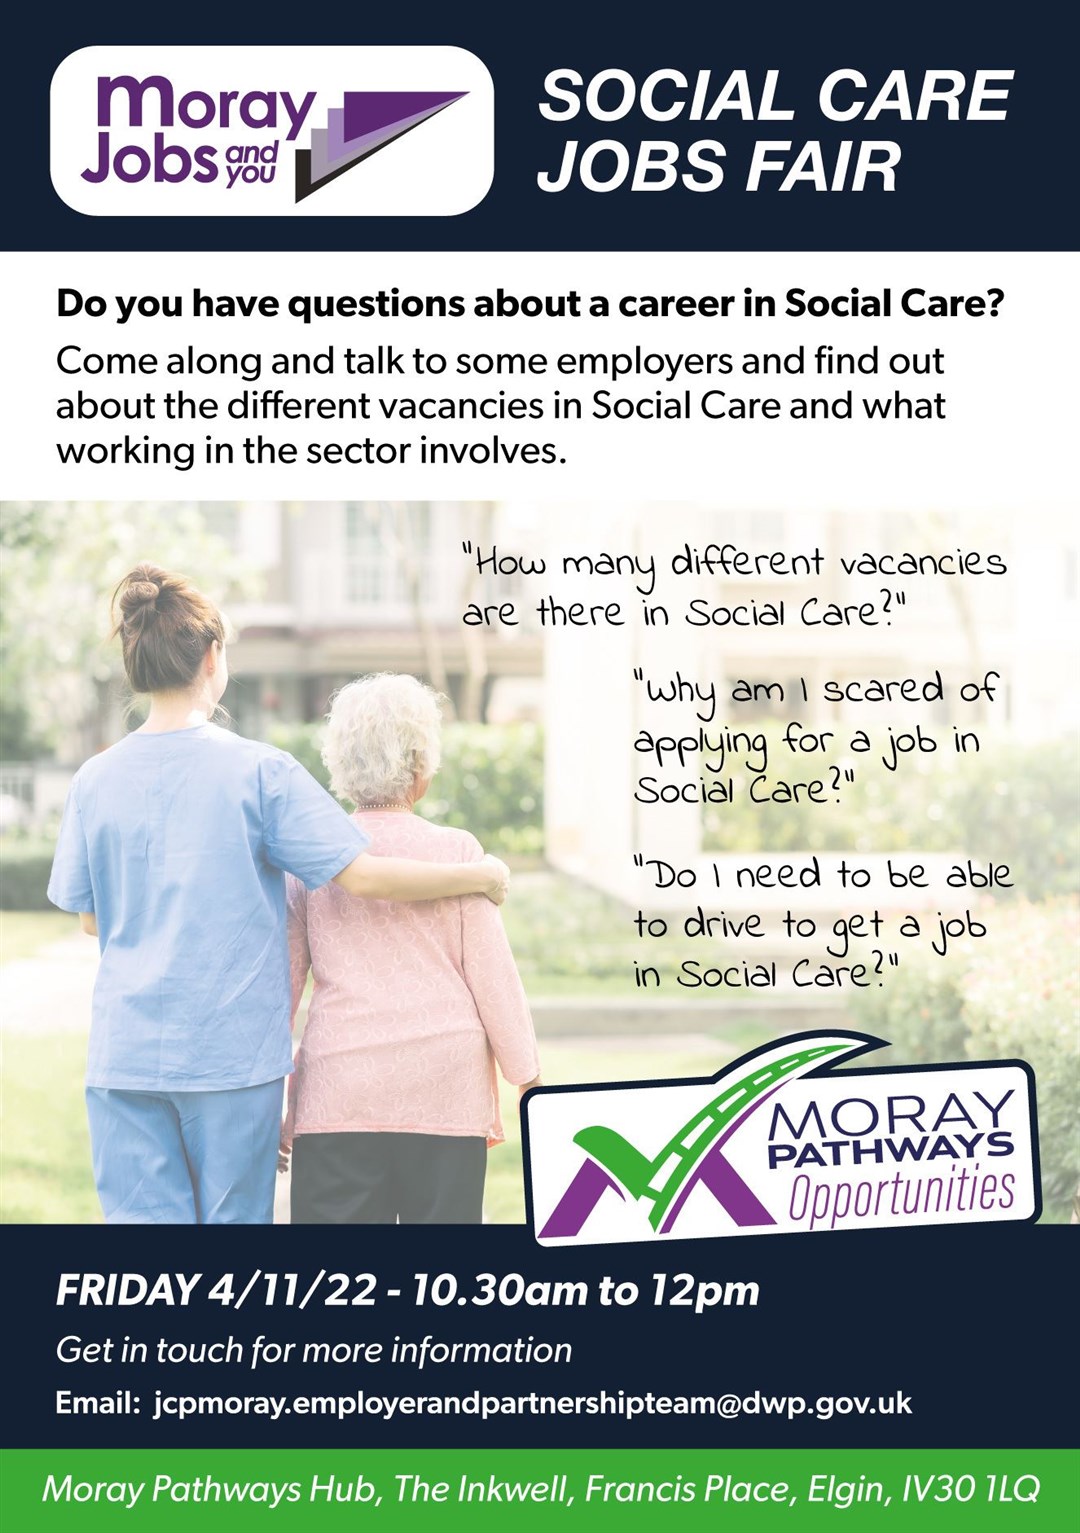 Vacancies in Moray's social care sector will be up for grabs at the forthcoming jobs fair.